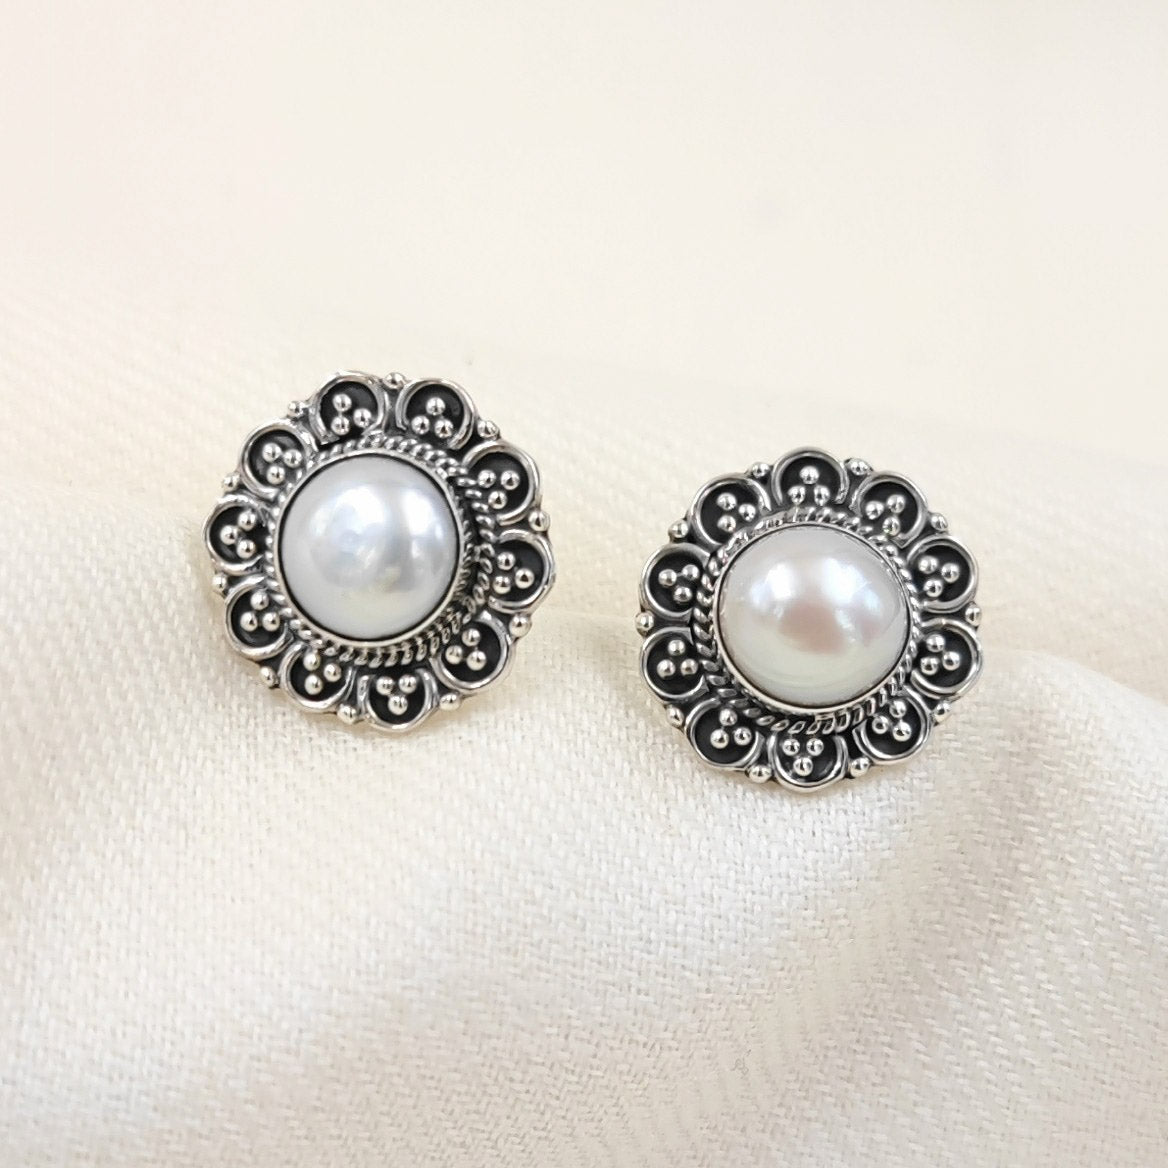 Silver Jewelry Earrings by Jauhri 92.5 Silver - Kusum Pearl Studs